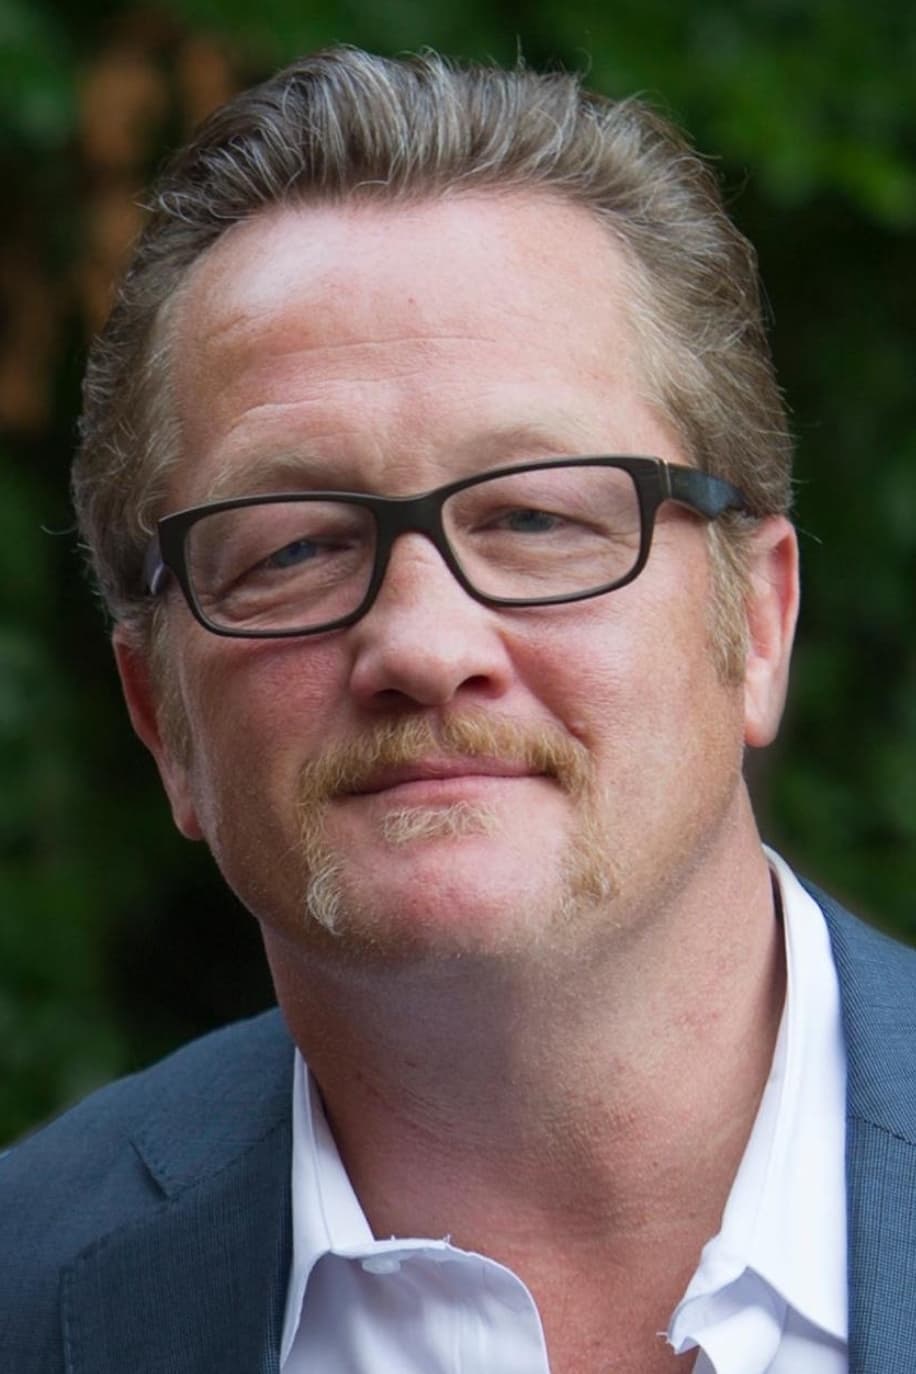 Christian Stolte | Clarence Darby